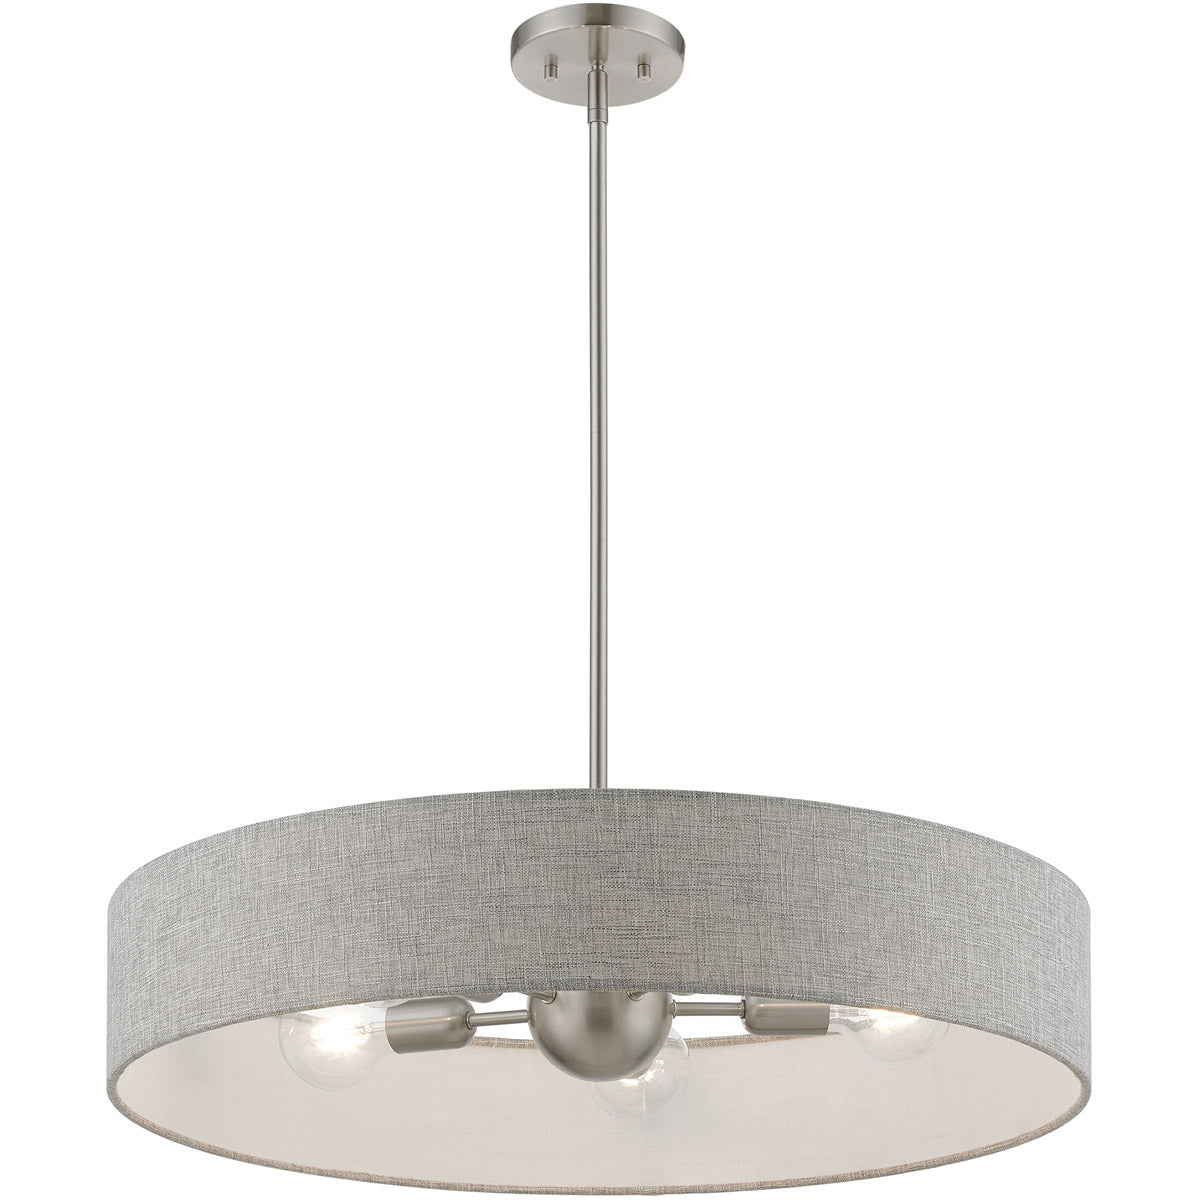 Elmhurst 5 Light 26 inch Pendant-Livex Lighting-LIVEX-46145-91-PendantsBrushed Nickel with Shiny White Accents-3-France and Son